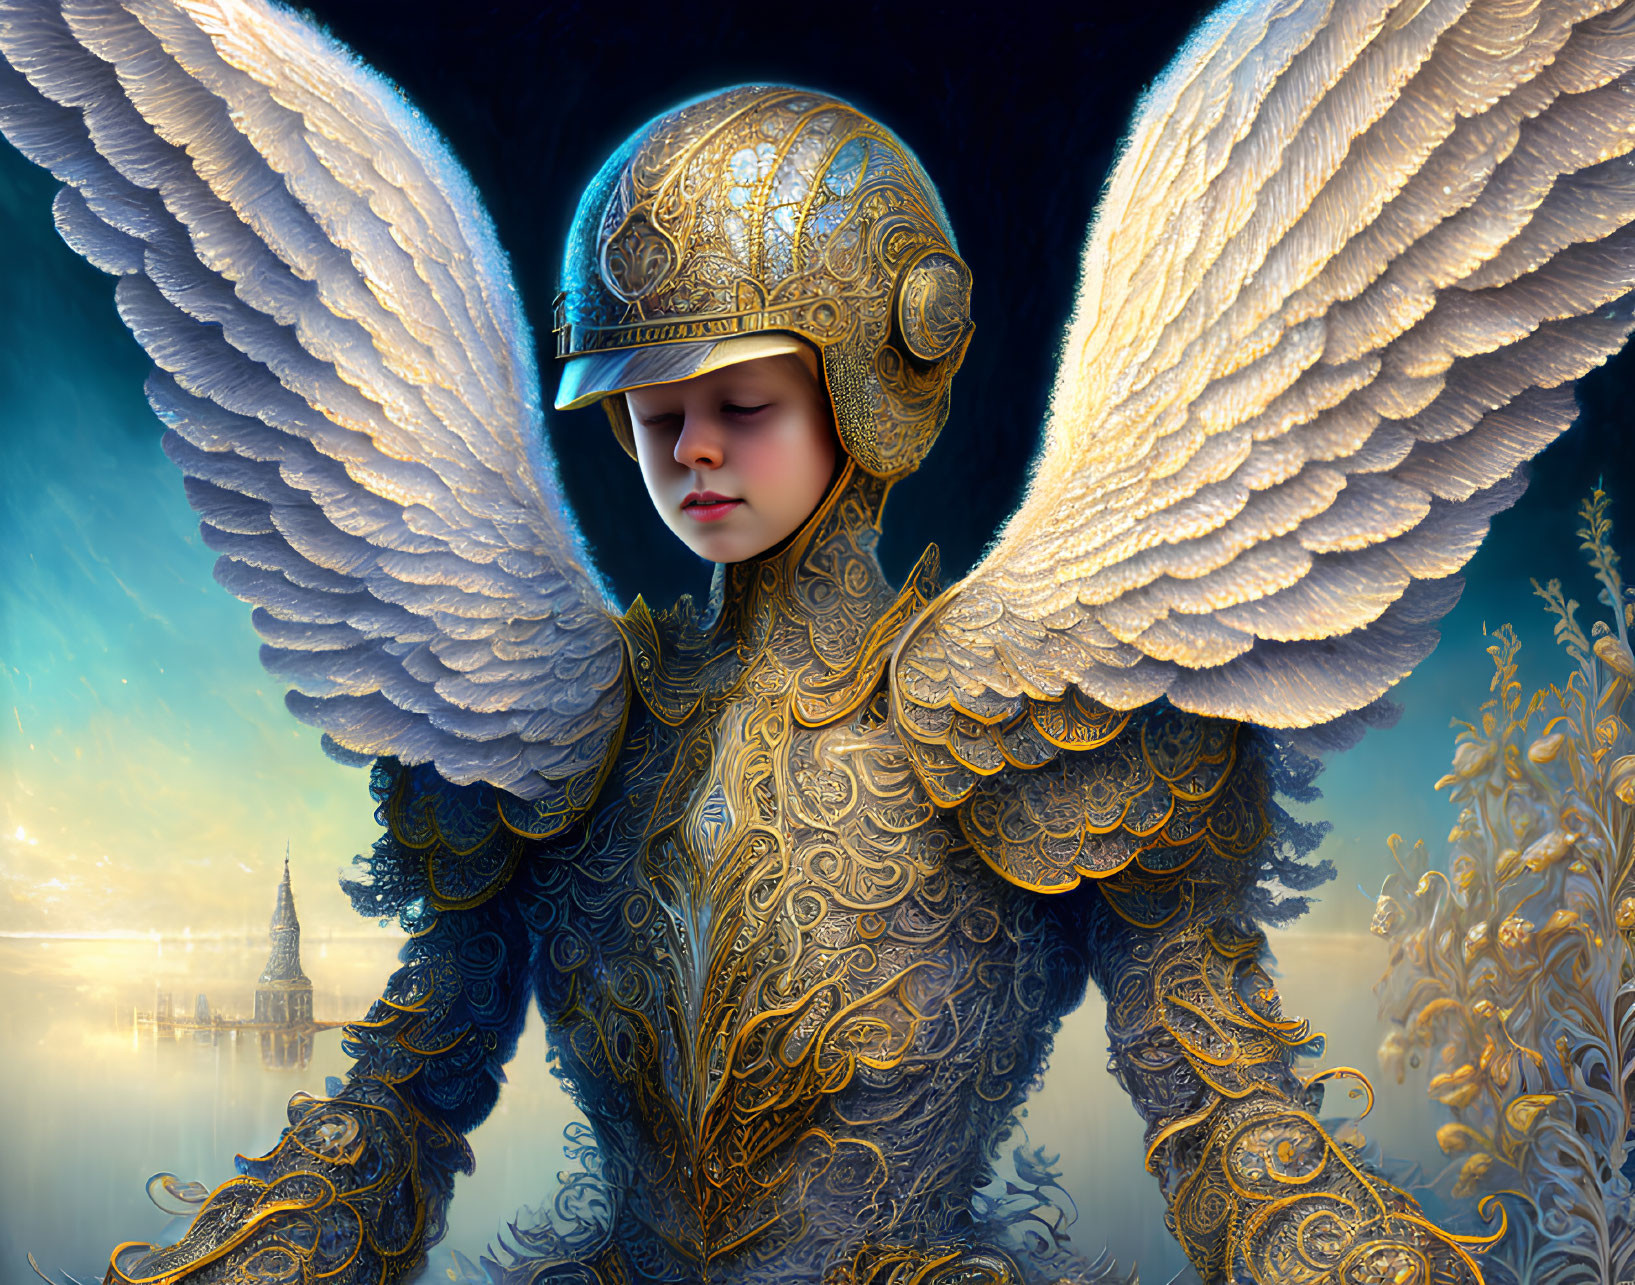 Golden-armored figure with intricate helmet and white wings against blue sky